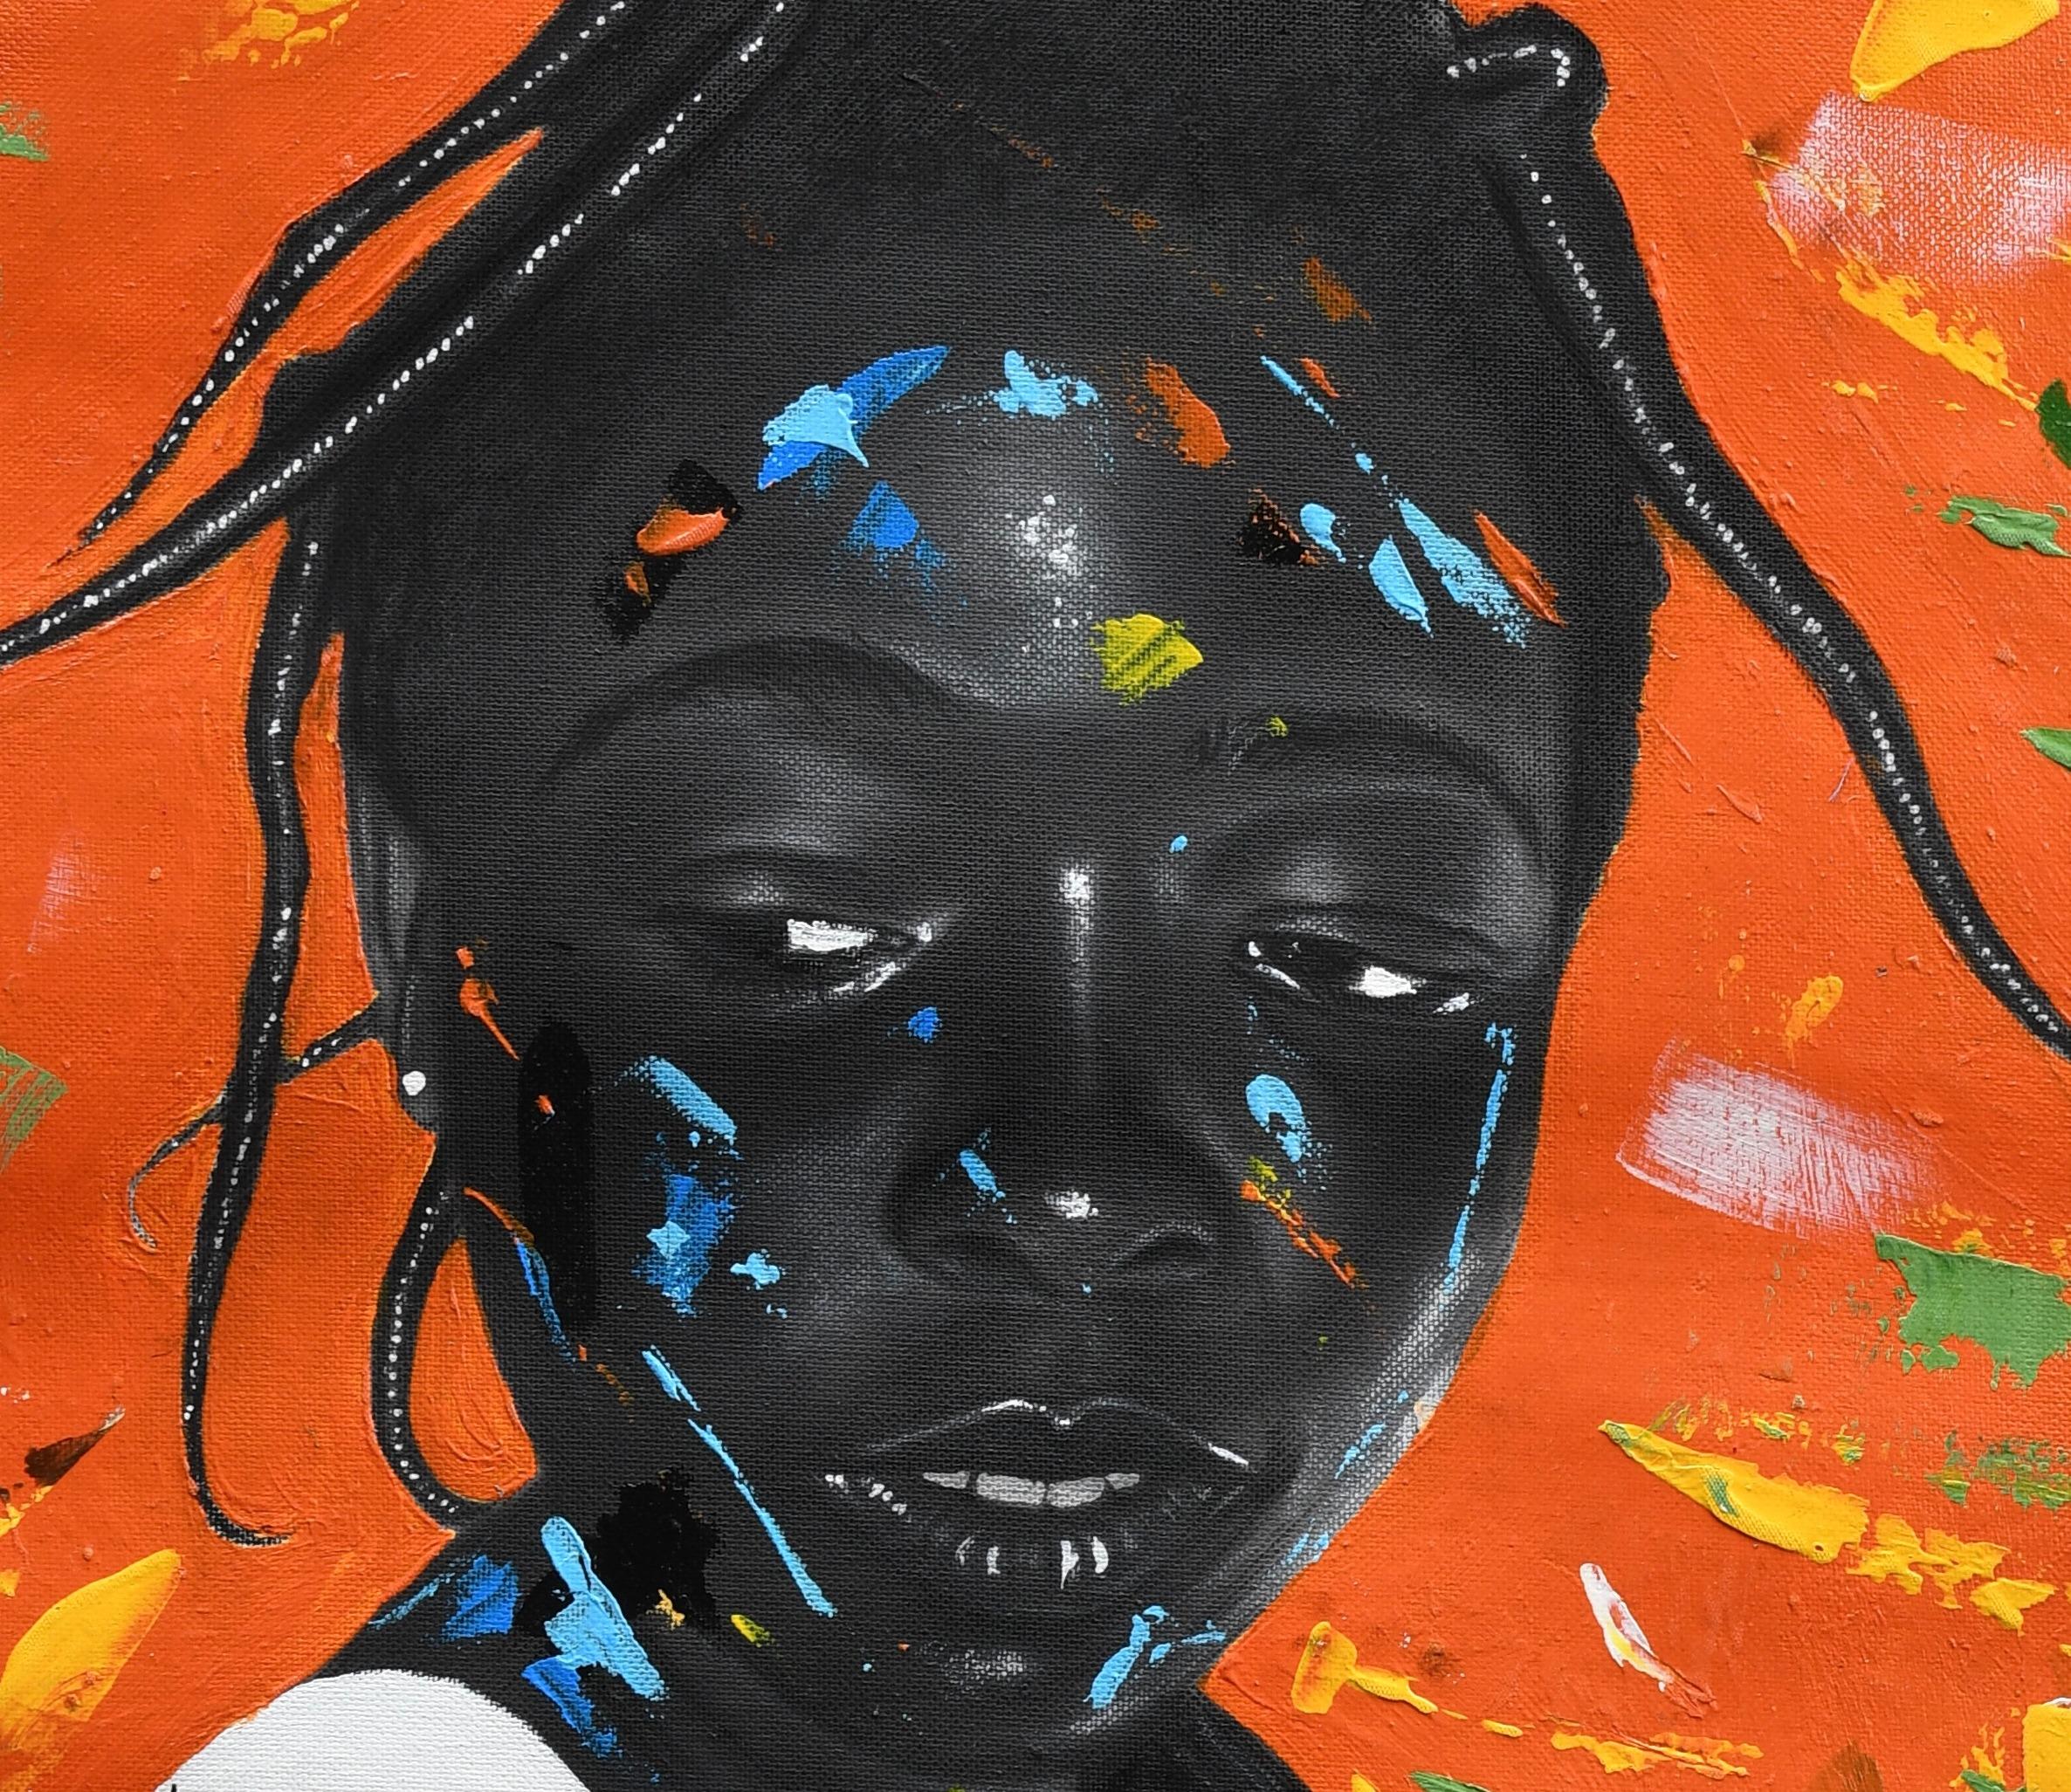  New generation - Painting by Eyitayo Alagbe 